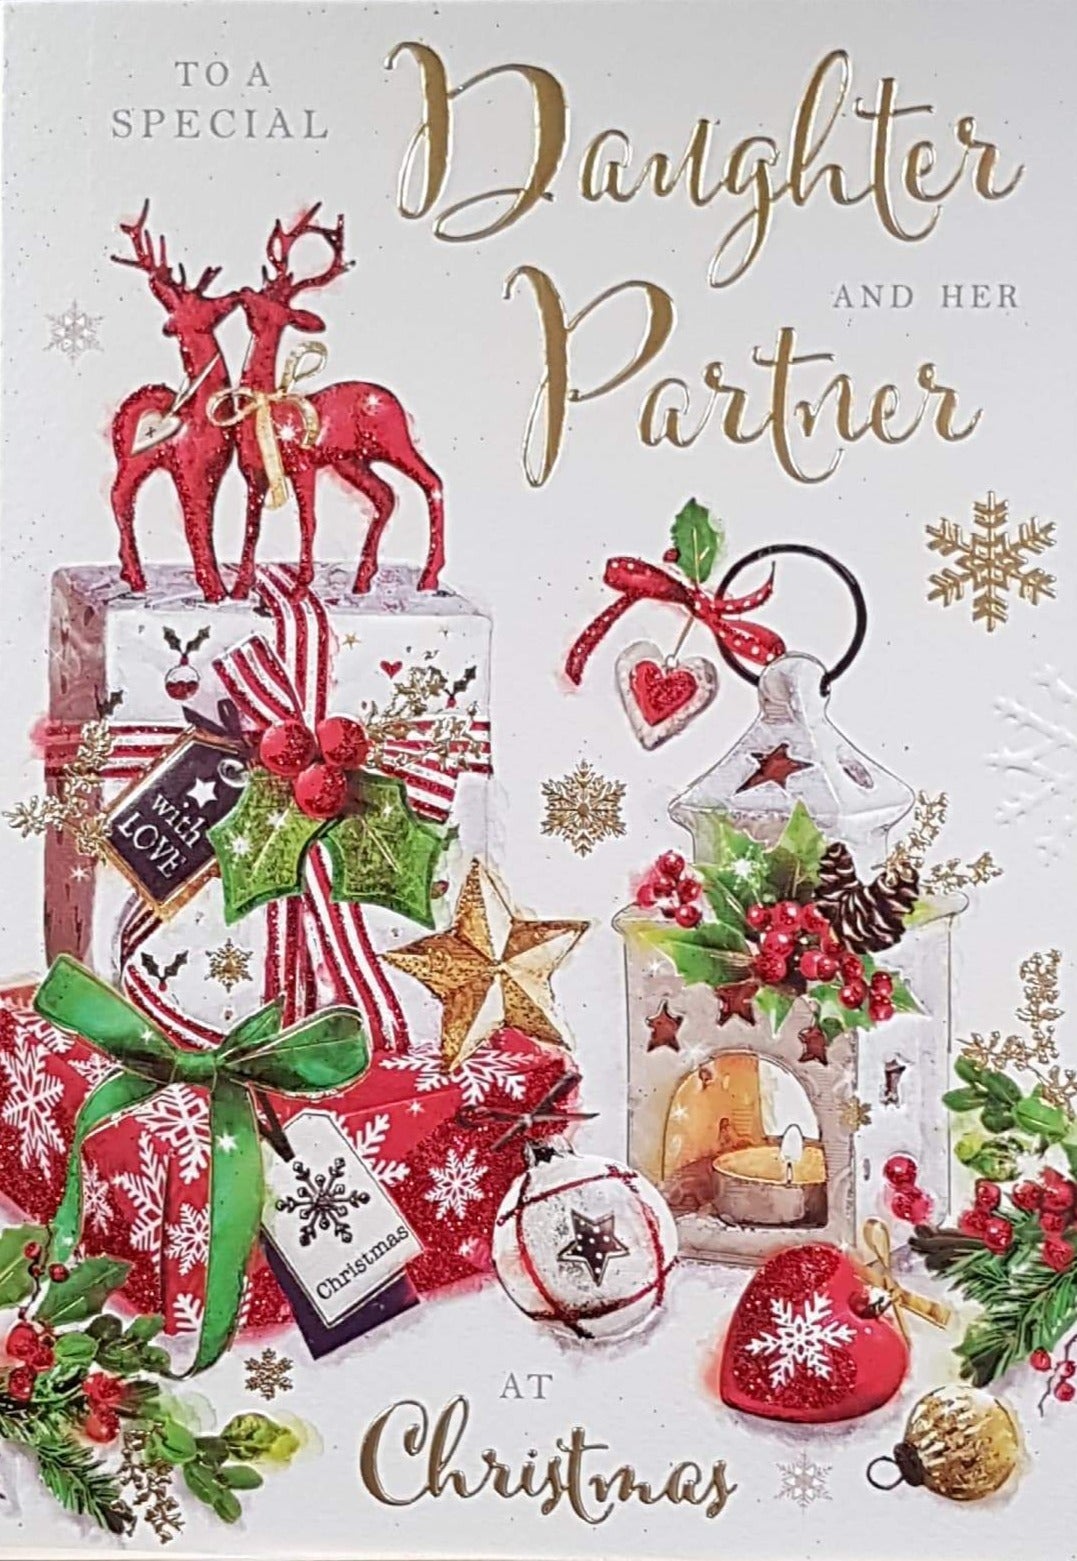 Daughter And Partner Christmas Card - At Christmas & Wrapped Gifts & Two Red Reindeer